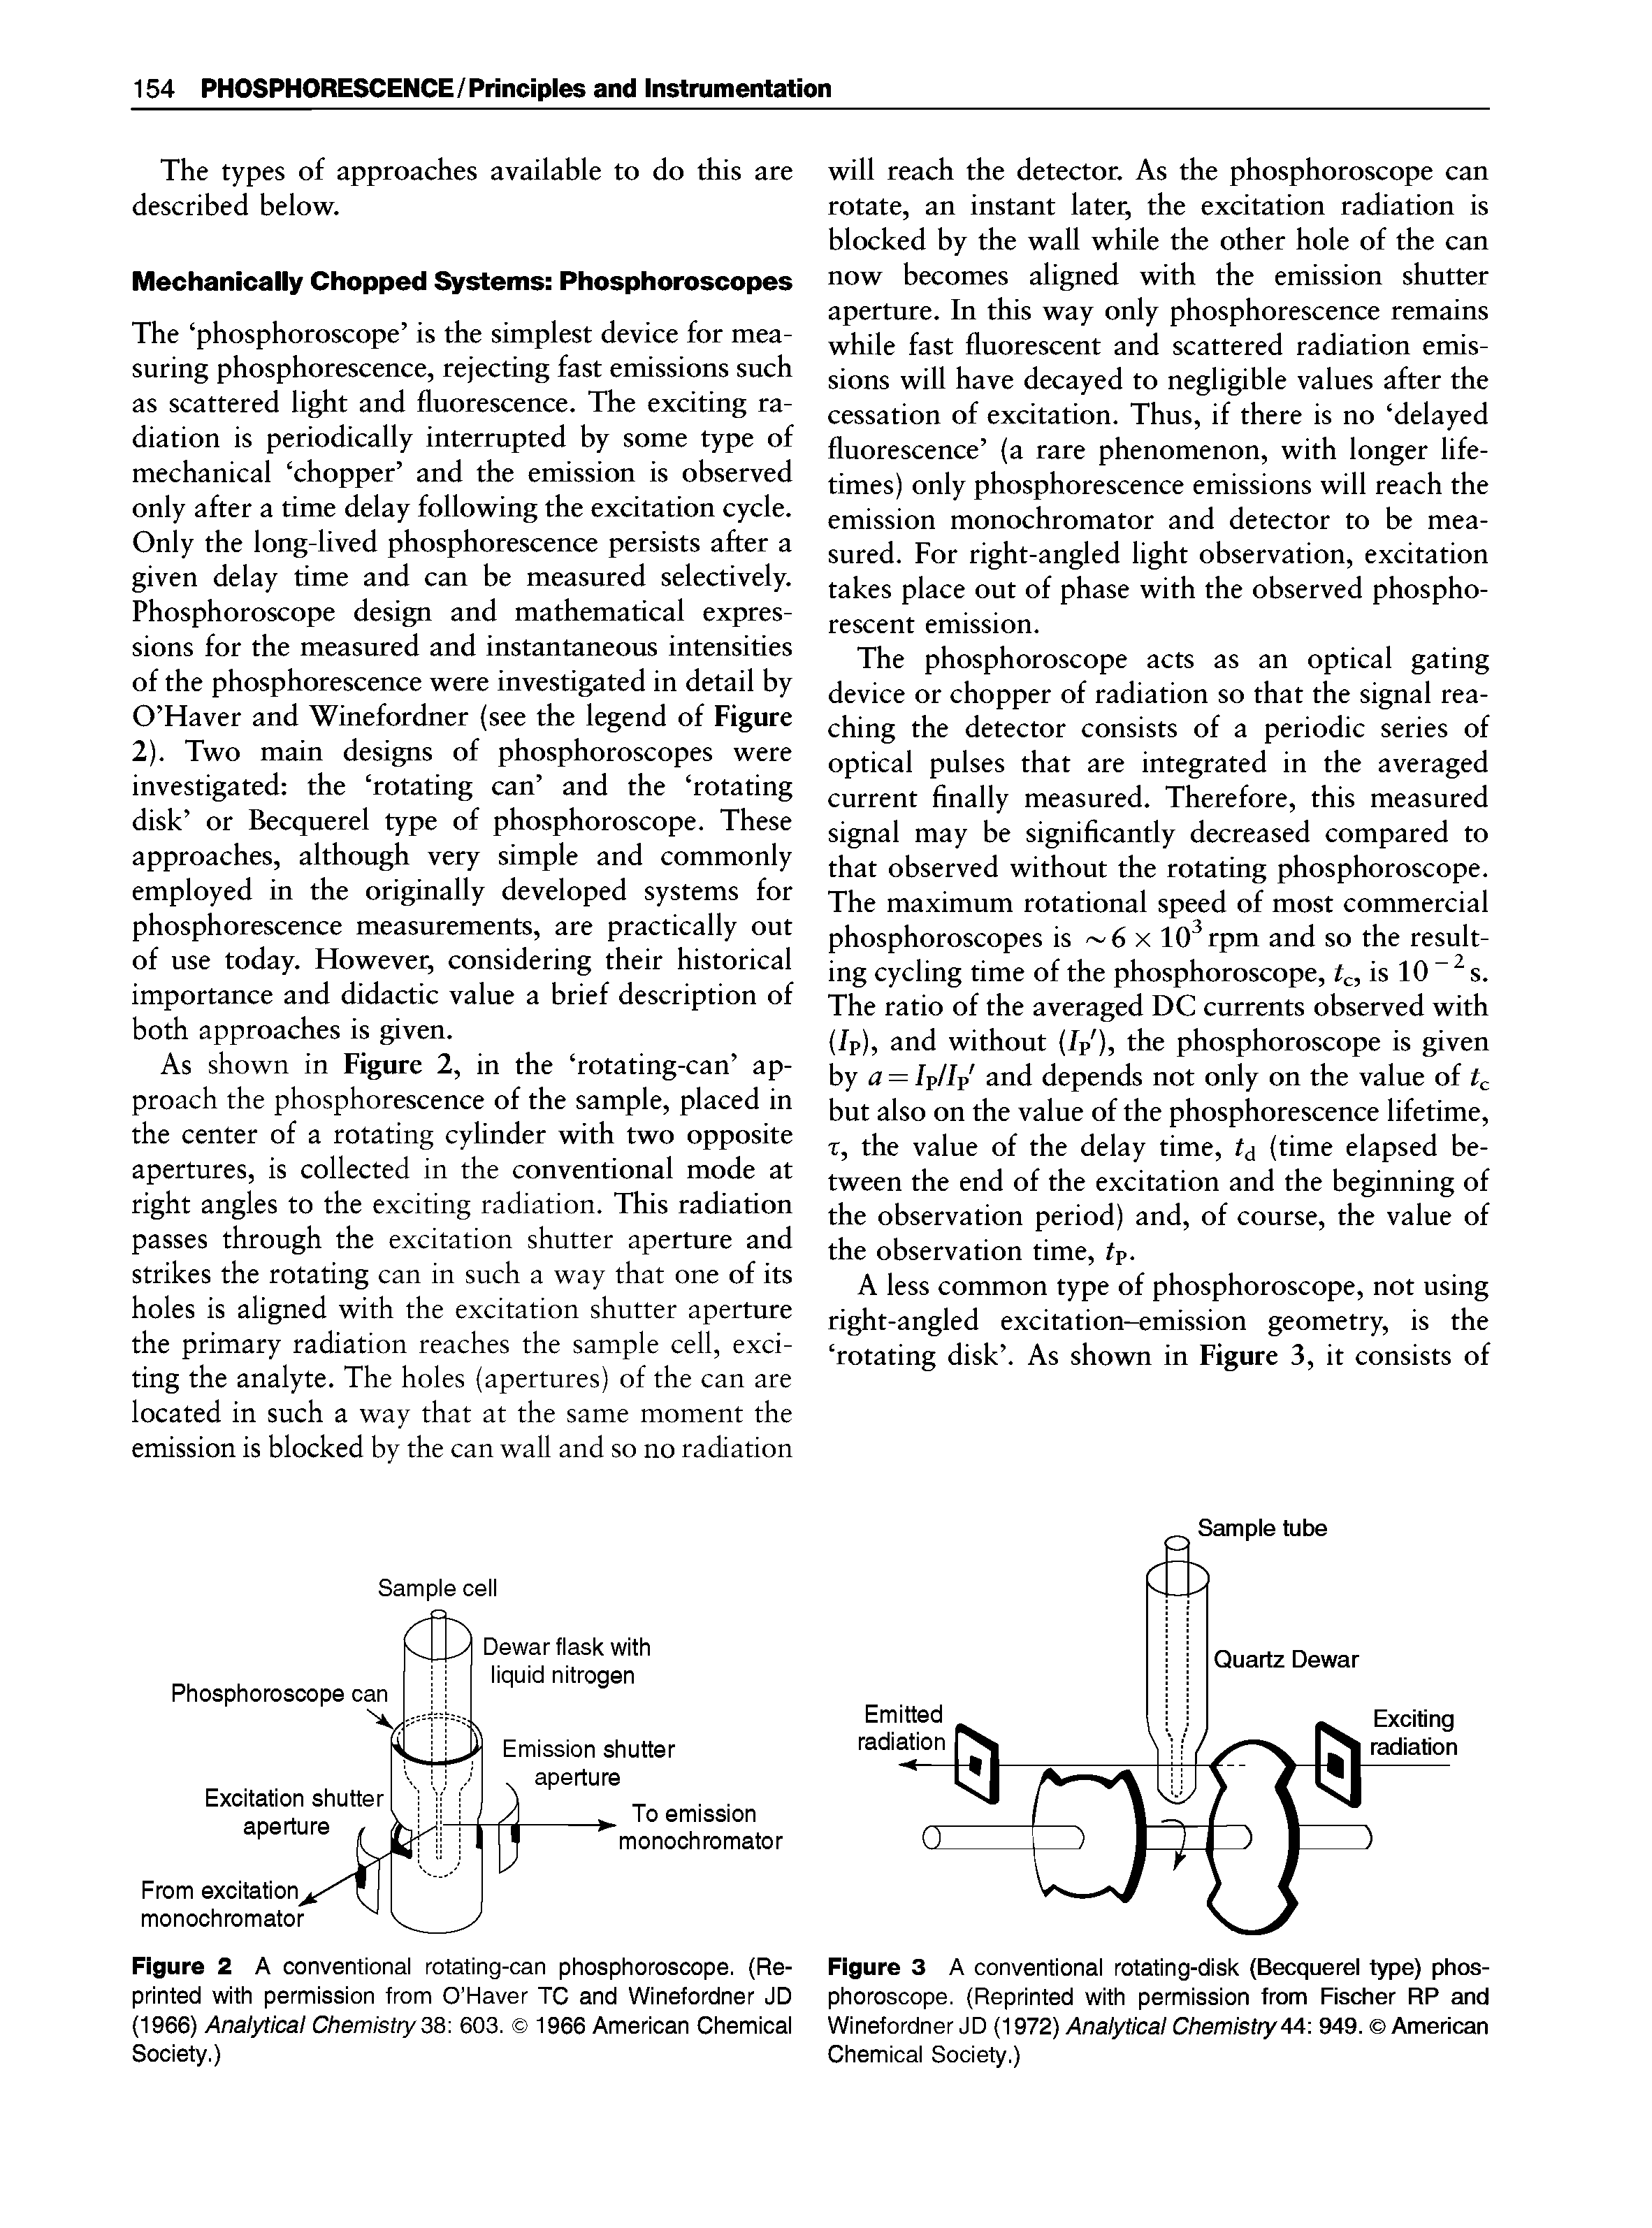 Figure 3 A conventionai rotating-disk (Becquerel type) phosphoroscope. (Reprinted with permission from Fischer RP and Winefordner JD (1972) Analytical Chemistry44-. 949. American Chemicai Sociefy.)...